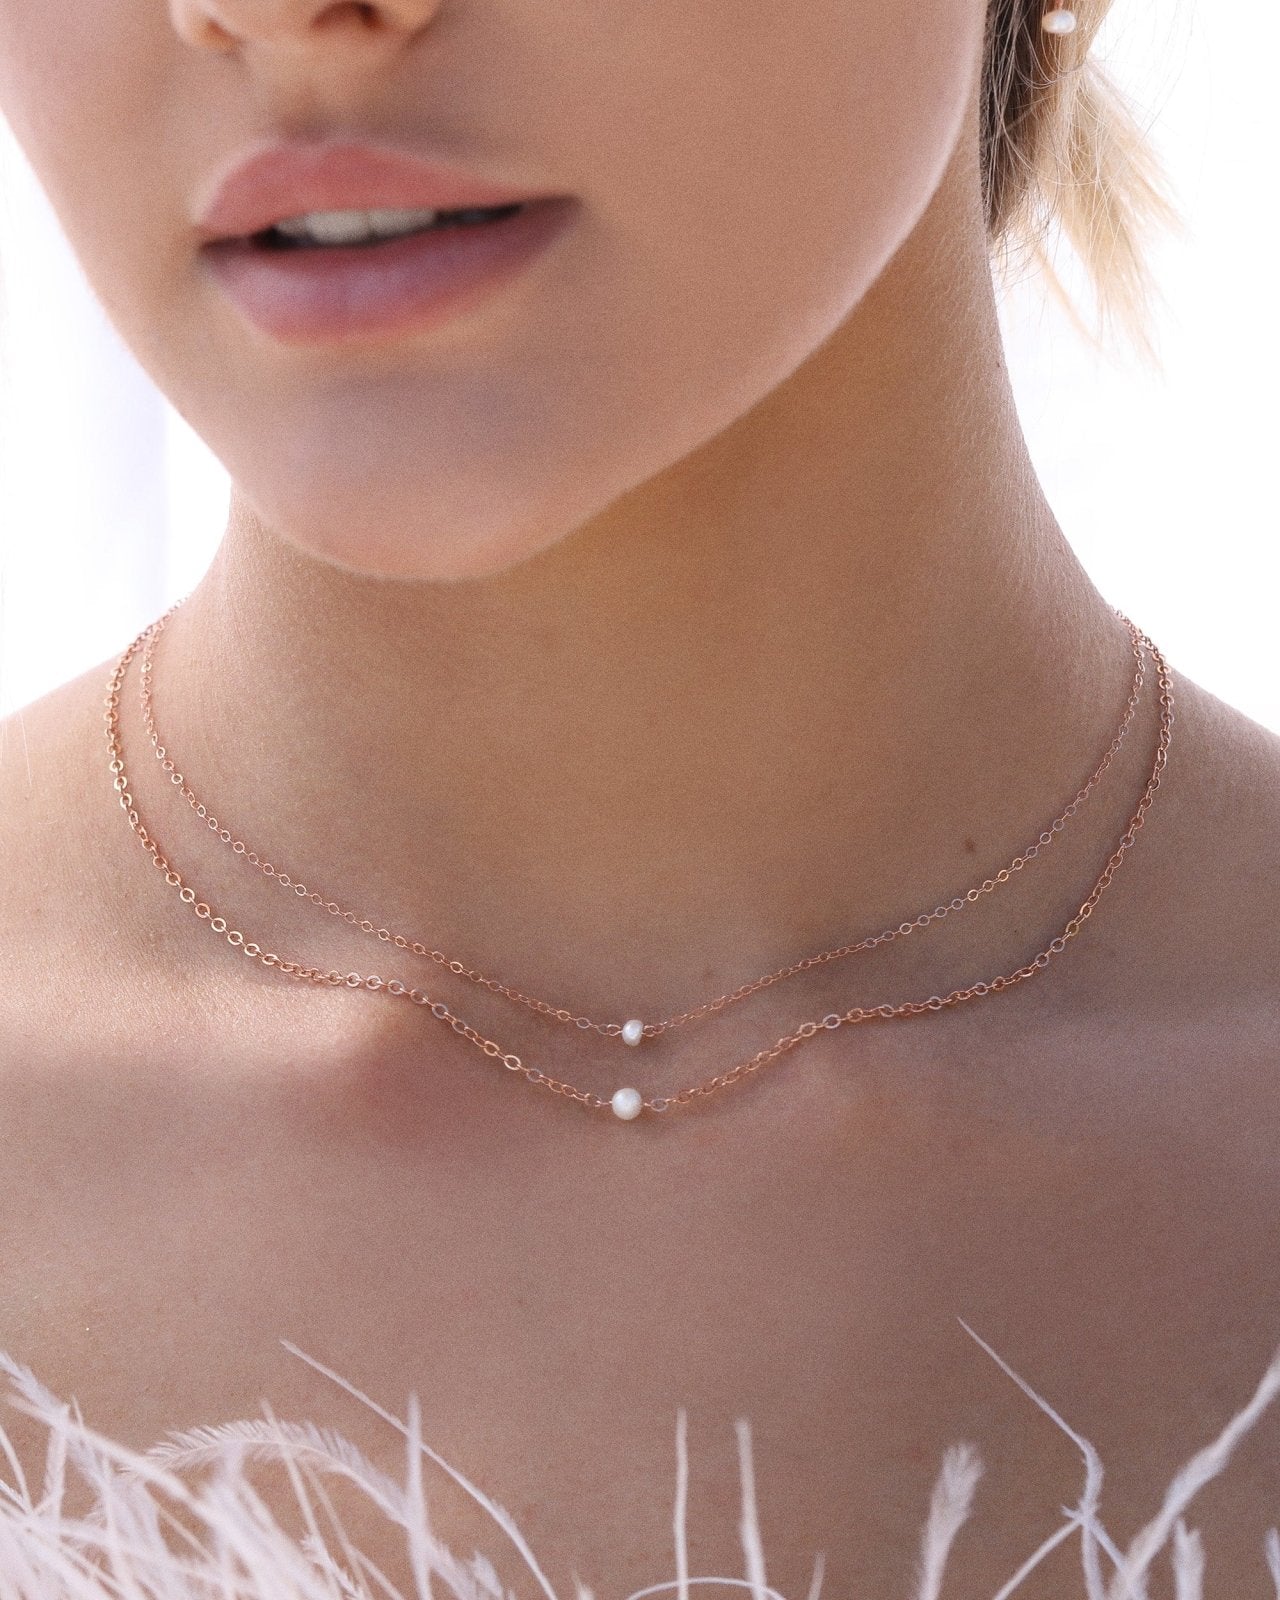 Load image into Gallery viewer, SMALL FRESHWATER PEARL NECKLACE- 14k Rose Gold - The Littl - Deluxe Chain - 37cm (choker)
